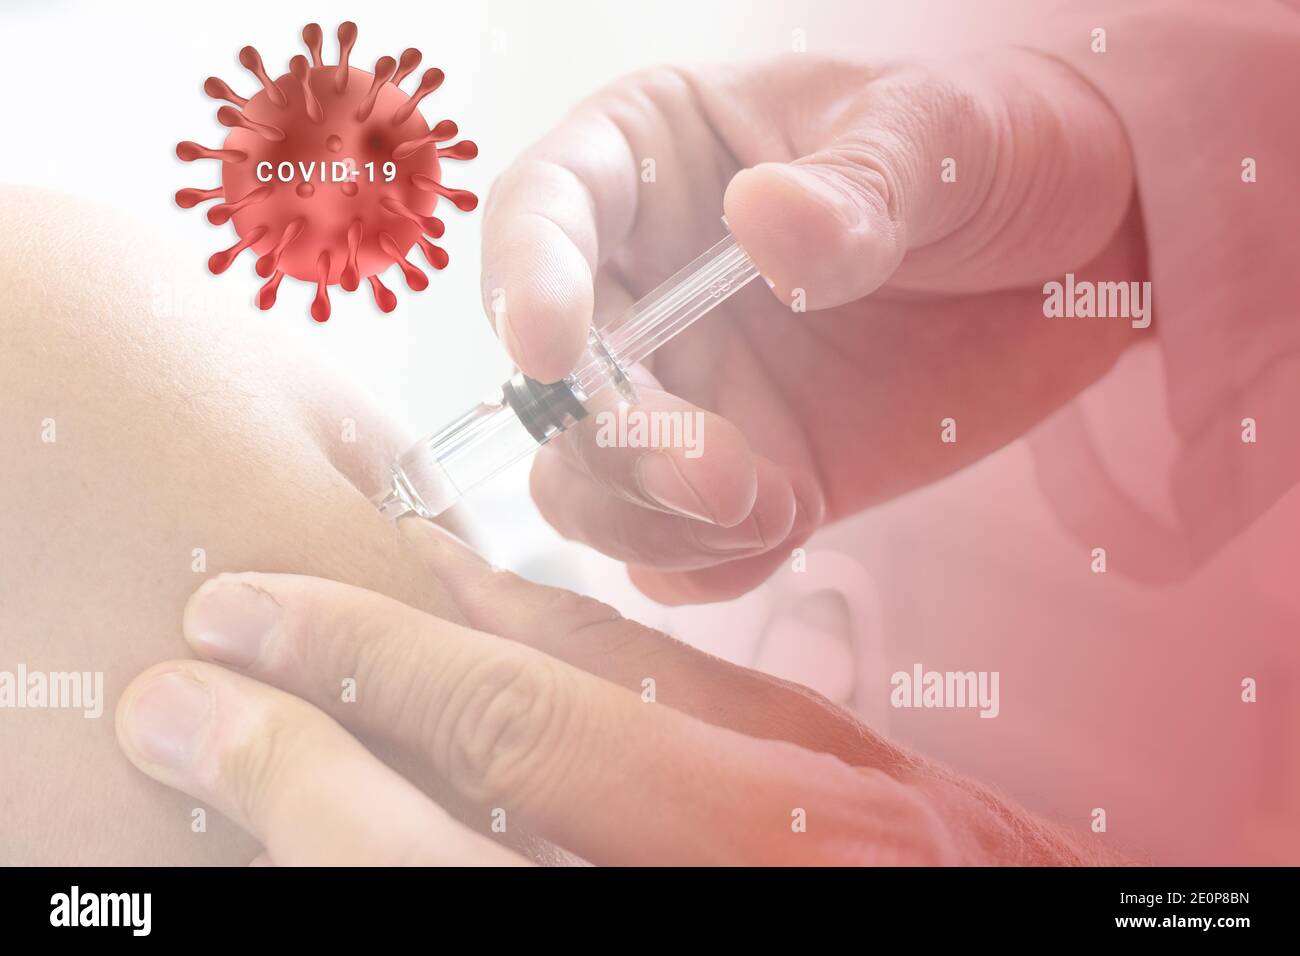 Covid-19 vaccine injection - close up of injection in arm with syringe and vaccine - banner design Stock Photo